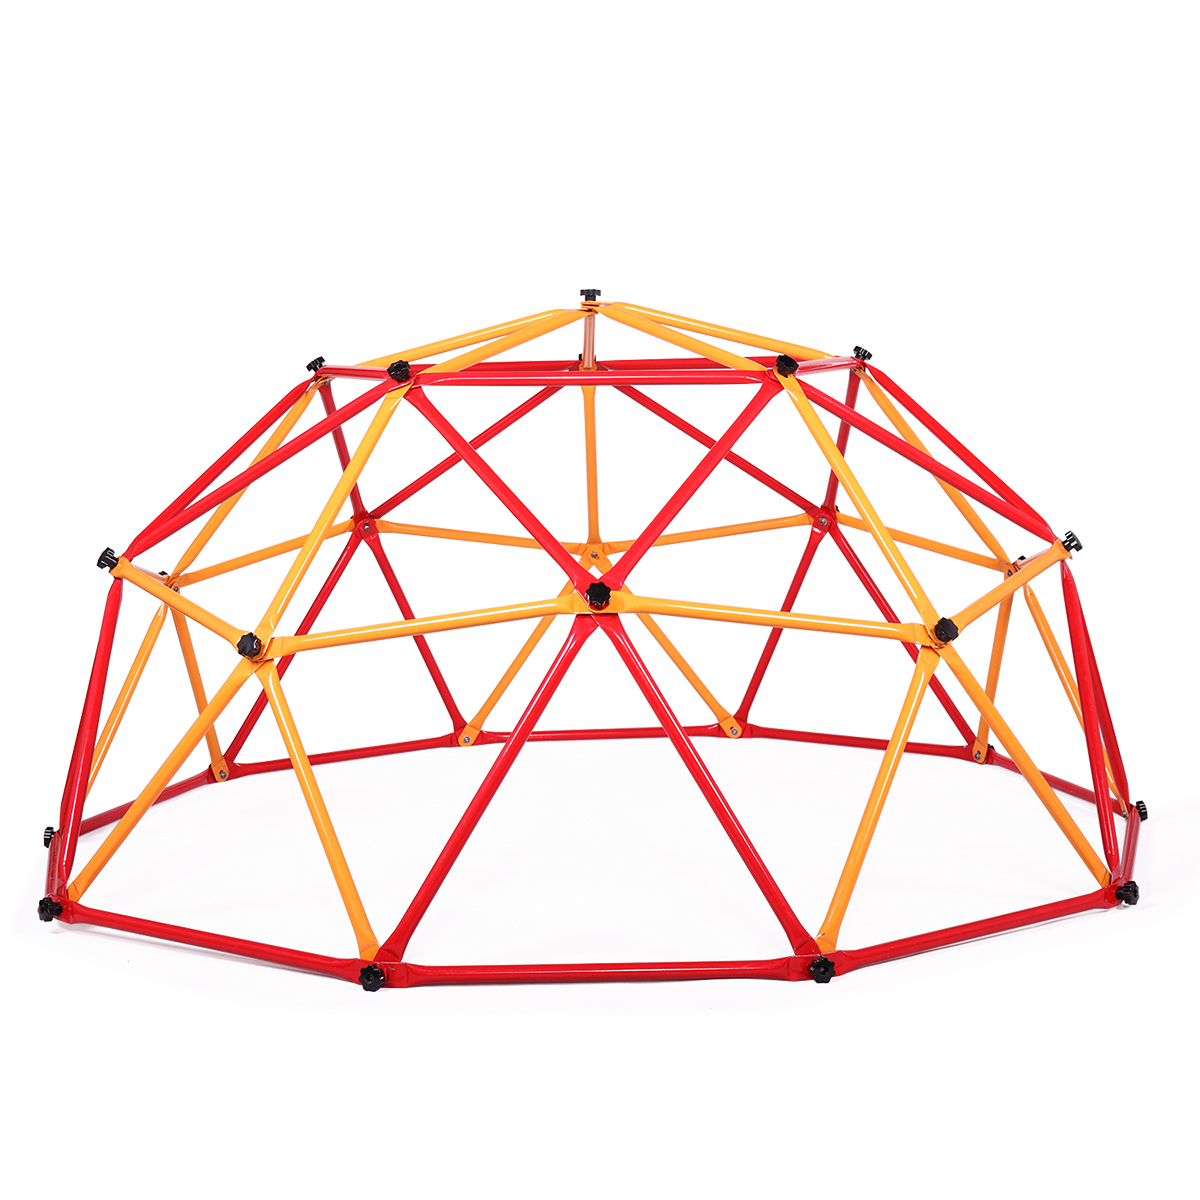 Nyeekoy Children’s Climbing Frame Universal Exercise Dome Climber Play Center Outdoor Playground For Fun, Red+Yellow TH17Y0318 1